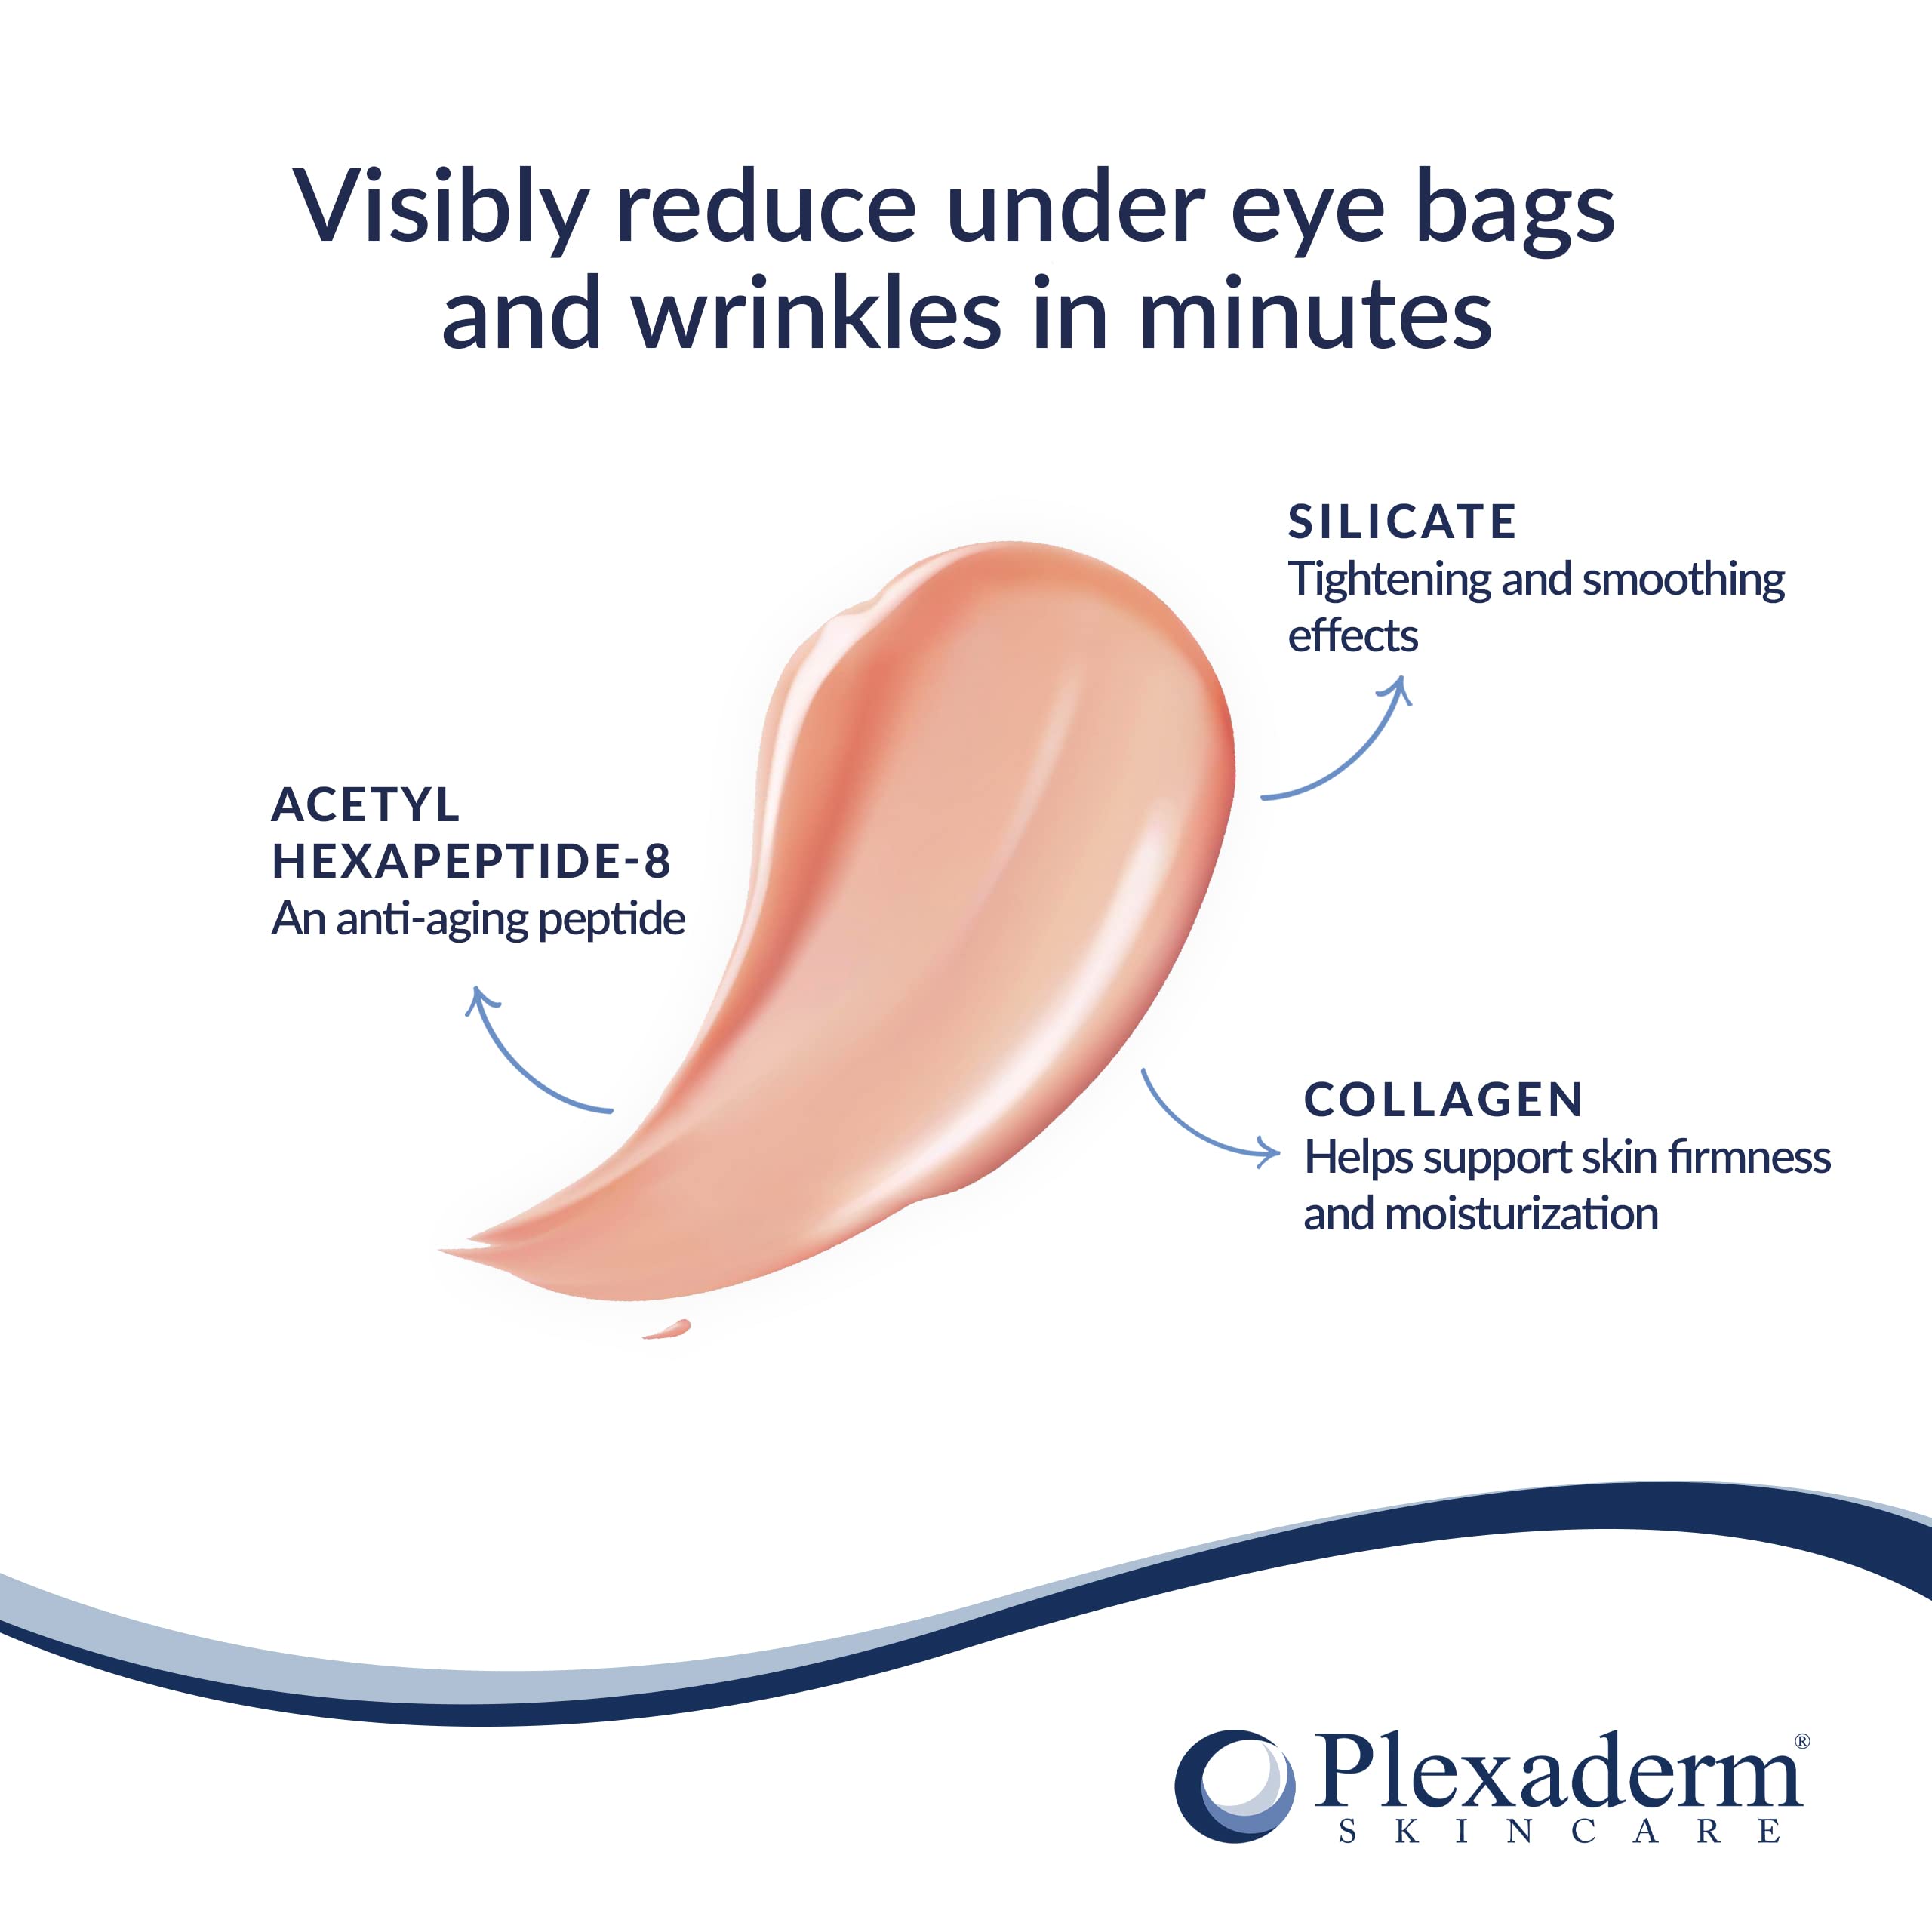 Plexaderm Rapid Reduction Eye Serum - Advanced Formula - Anti Aging Serum Visibly Reduces Under-Eye Bags, Wrinkles, Dark Circles, Fine Lines & Crow's Feet Instantly - Instant Wrinkle Remover for Face (0.25 Fl Oz)